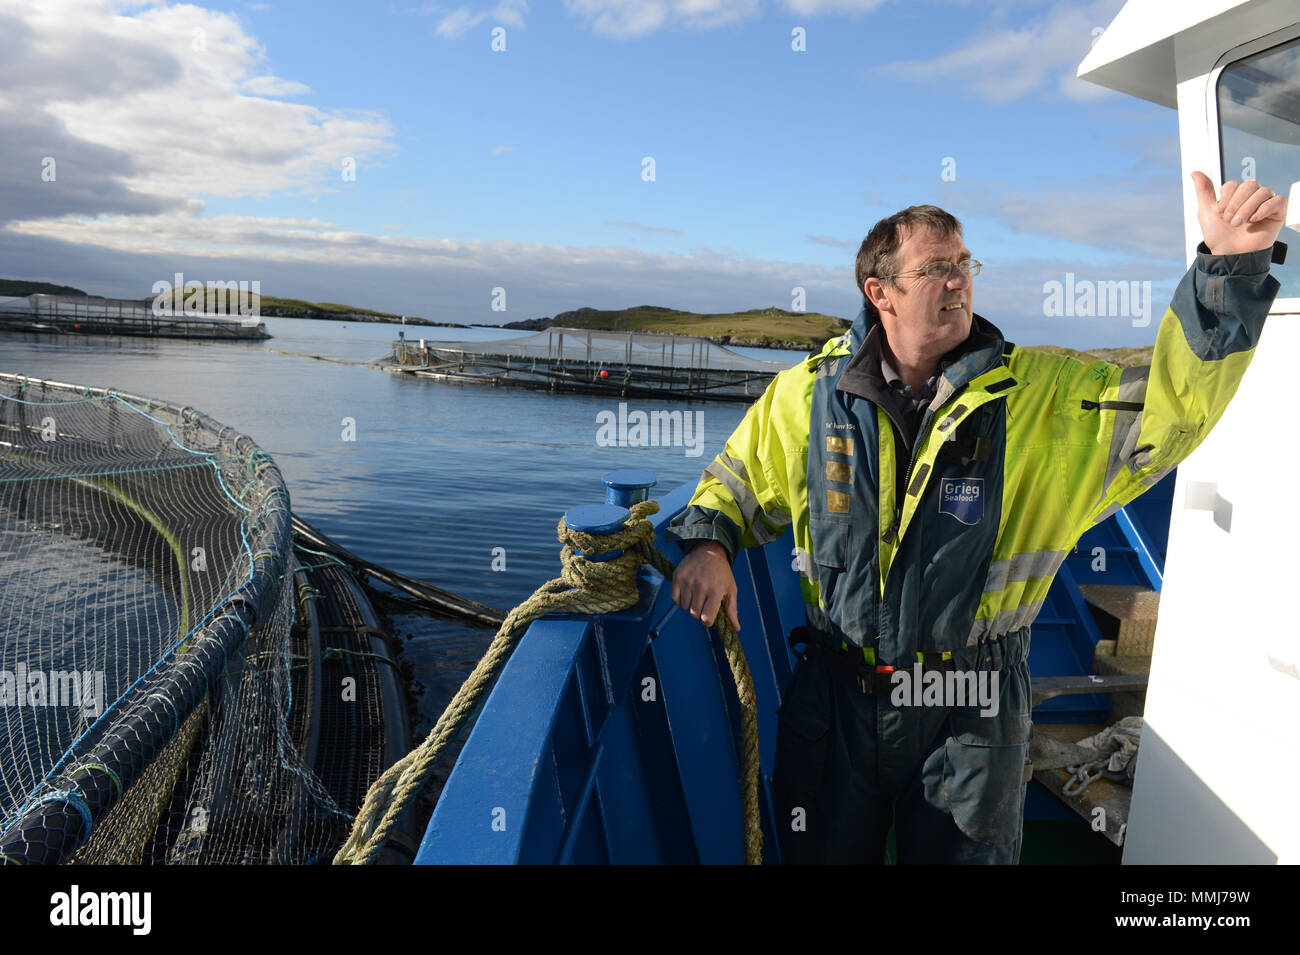 Salmon farmer on a salmon boat tying it up to cages before feeding the fish in the cages Stock Photo